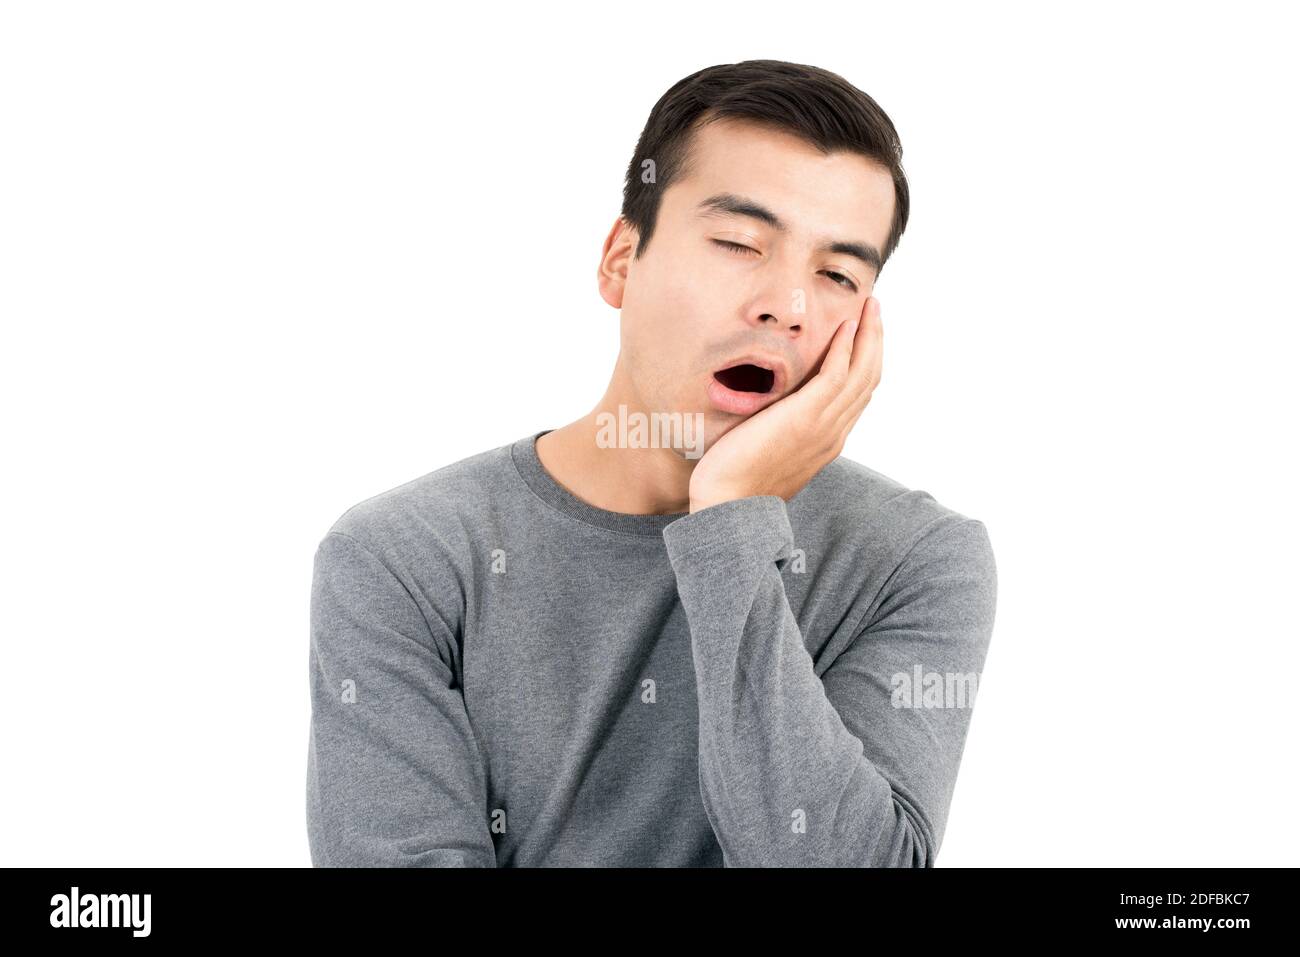 Bored and sleepy man yawning with hand on cheek - isolated on white background Stock Photo